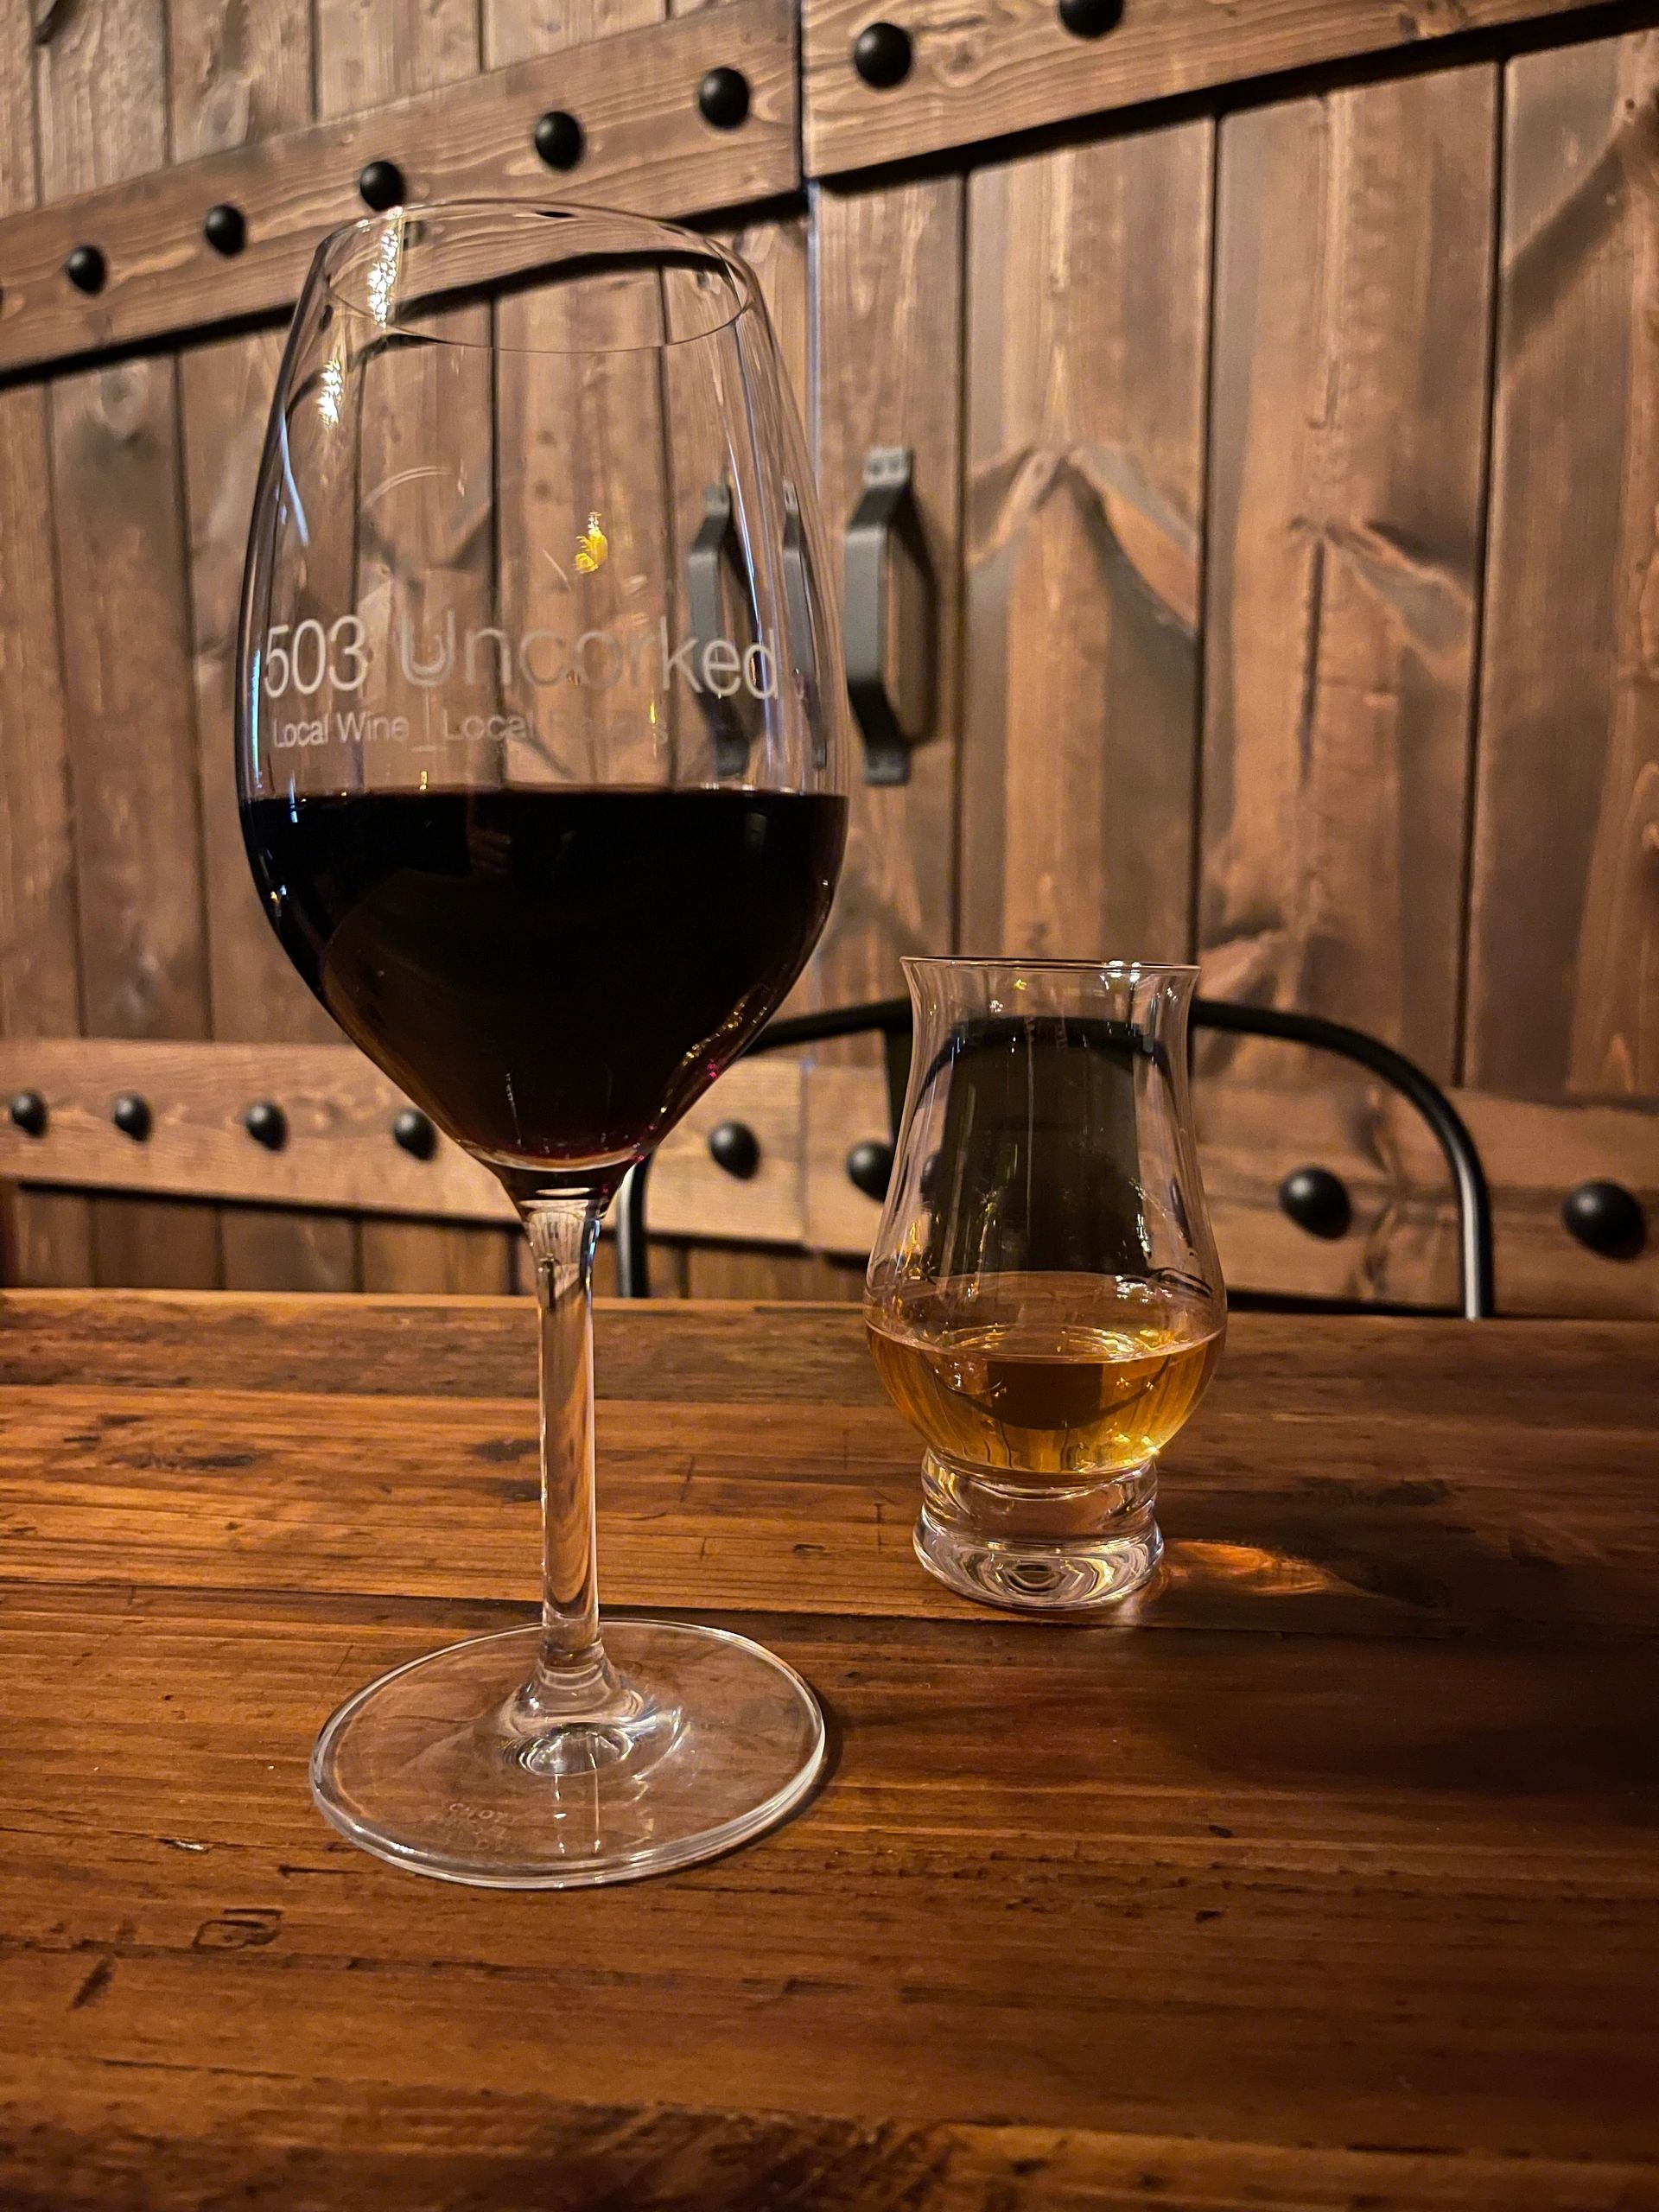 Discover local wines, craft cocktails, and delicious flavors at 503 Uncorked. Gift cards available!